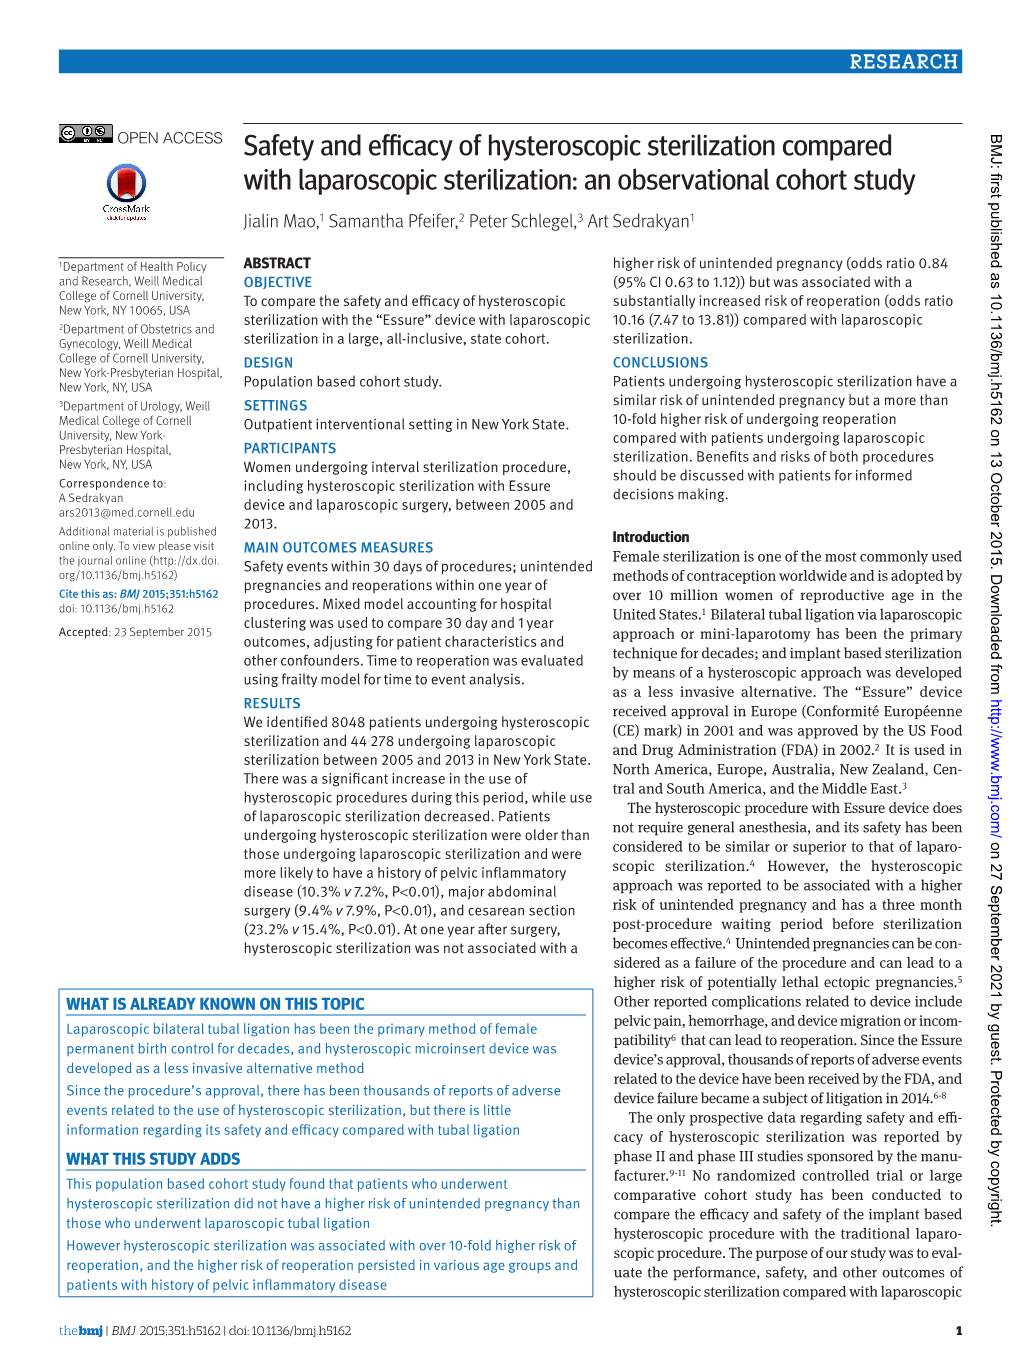 Safety and Efficacy of Hysteroscopic Sterilization Compared BMJ: First Published As 10.1136/Bmj.H5162 on 13 October 2015